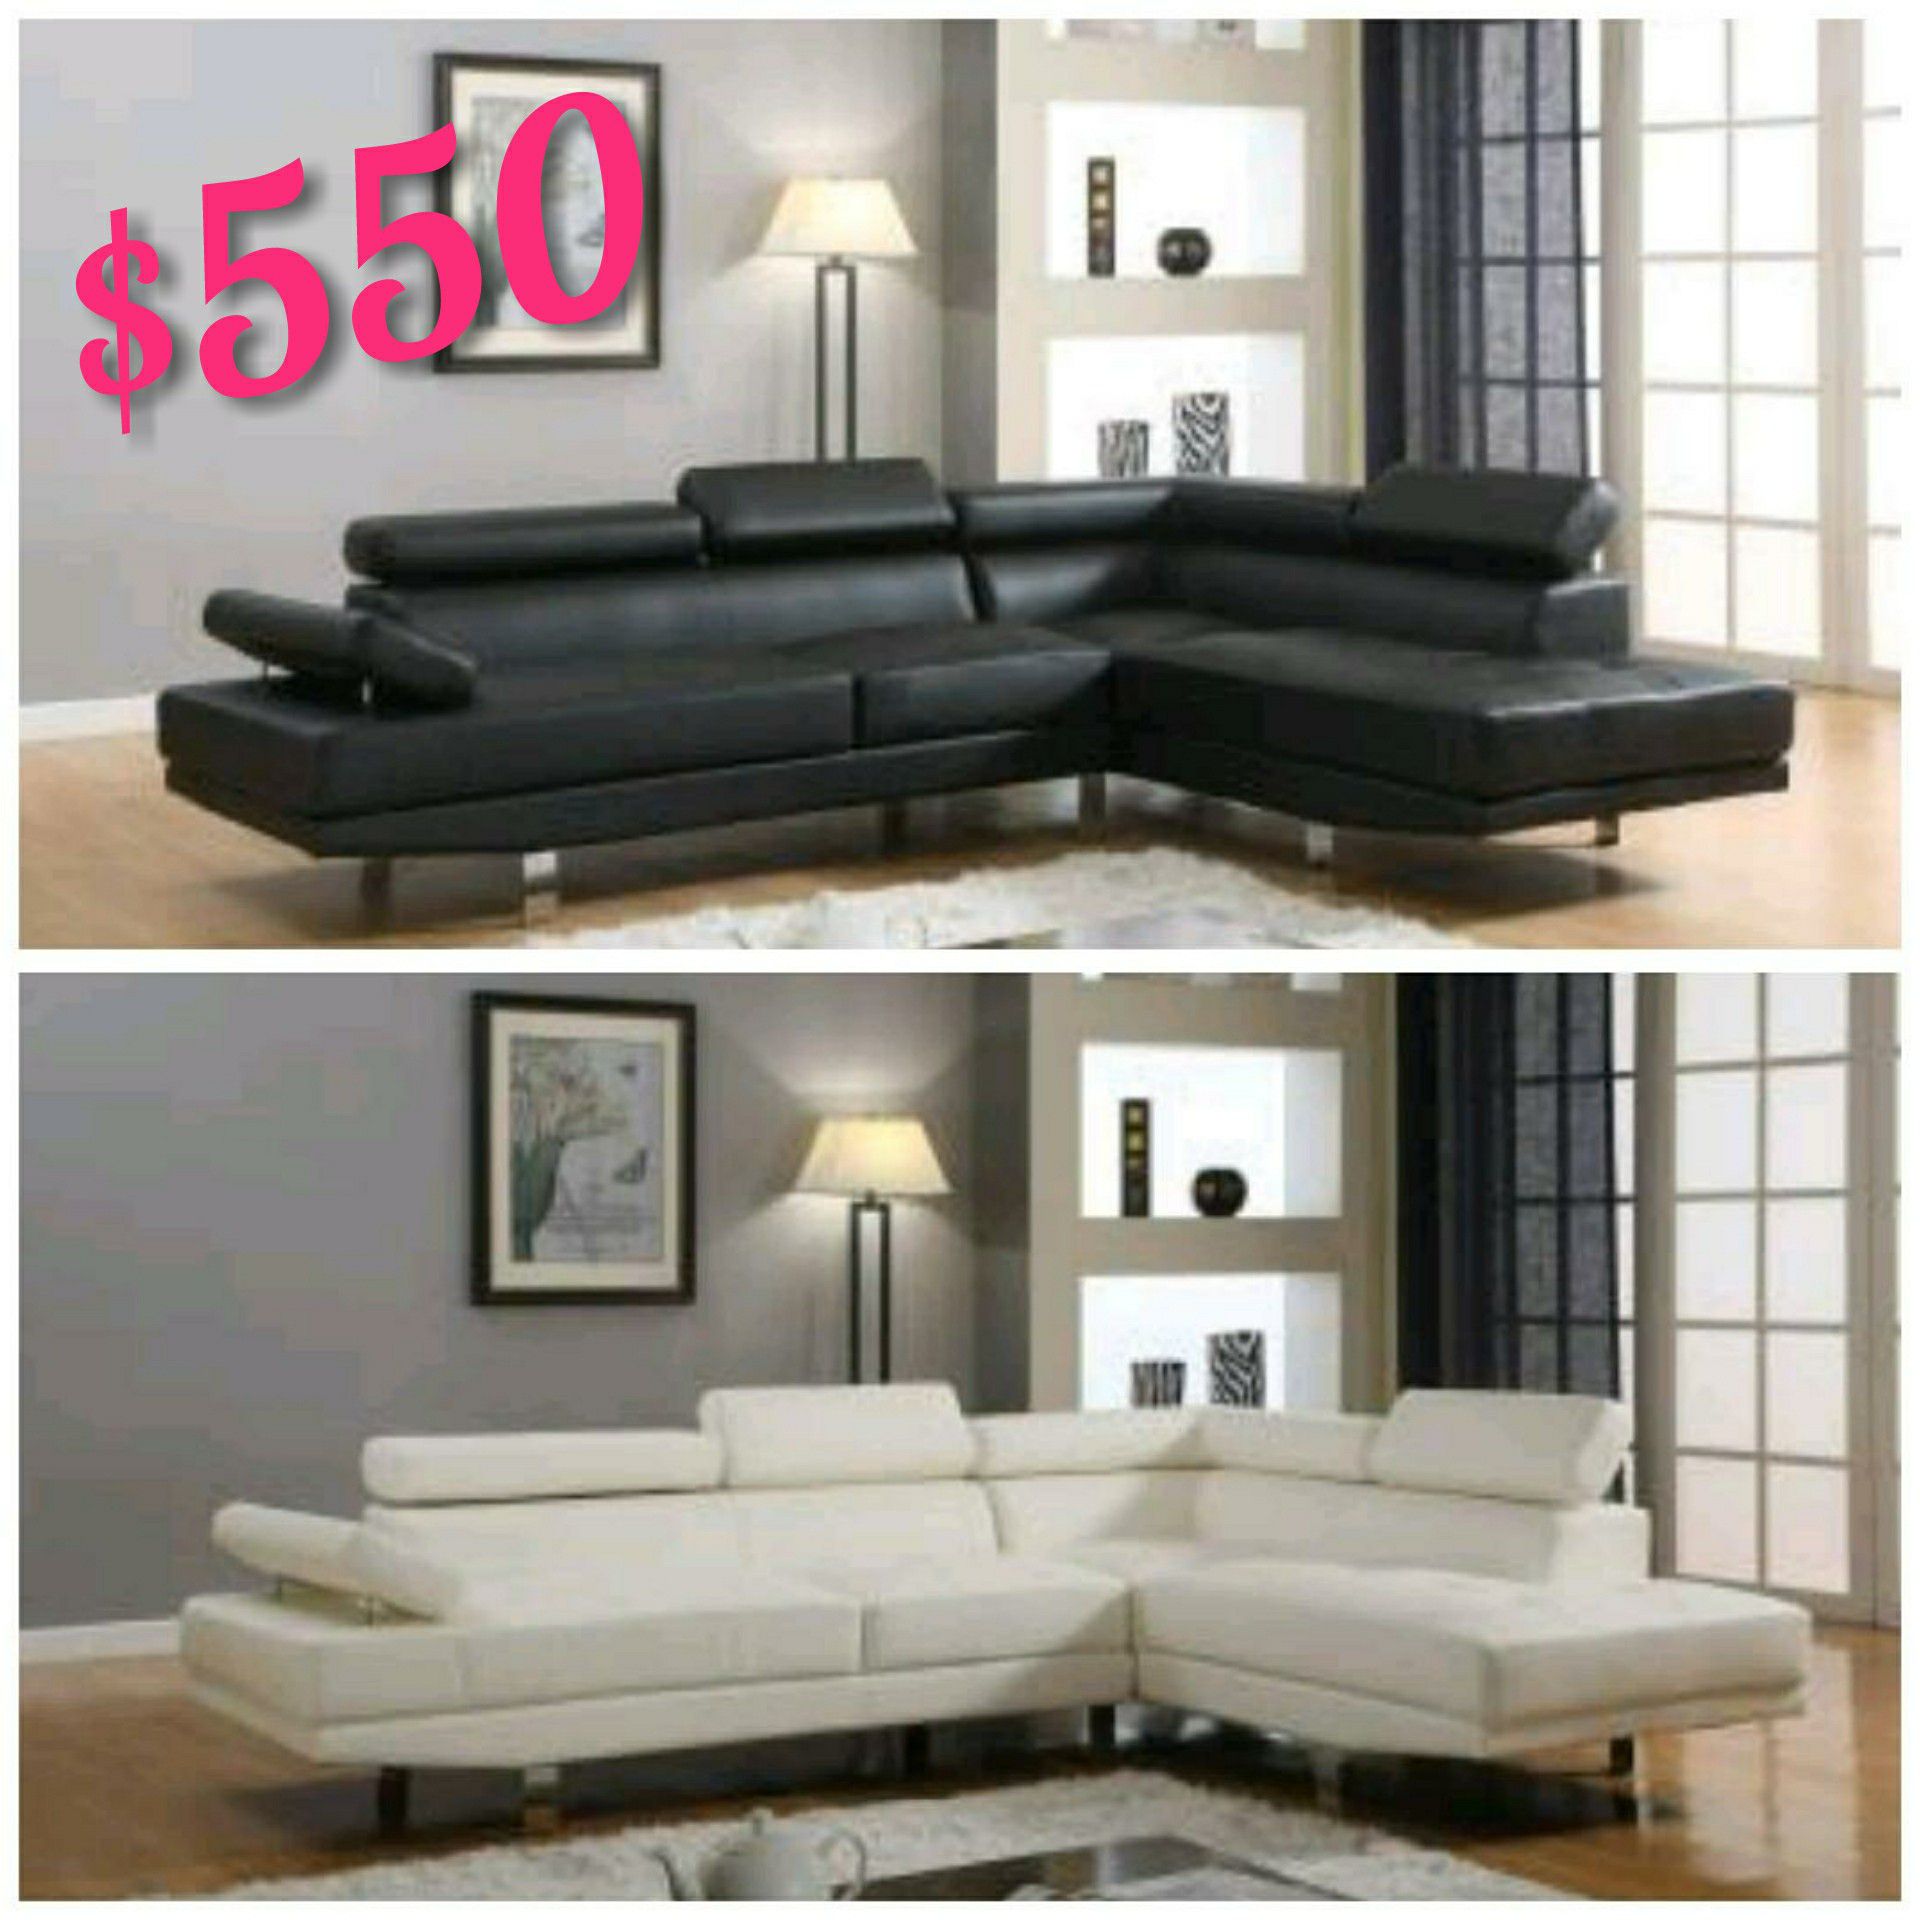 On Sale! New Sectional | Available in Black or White | Delivery & Financing Available